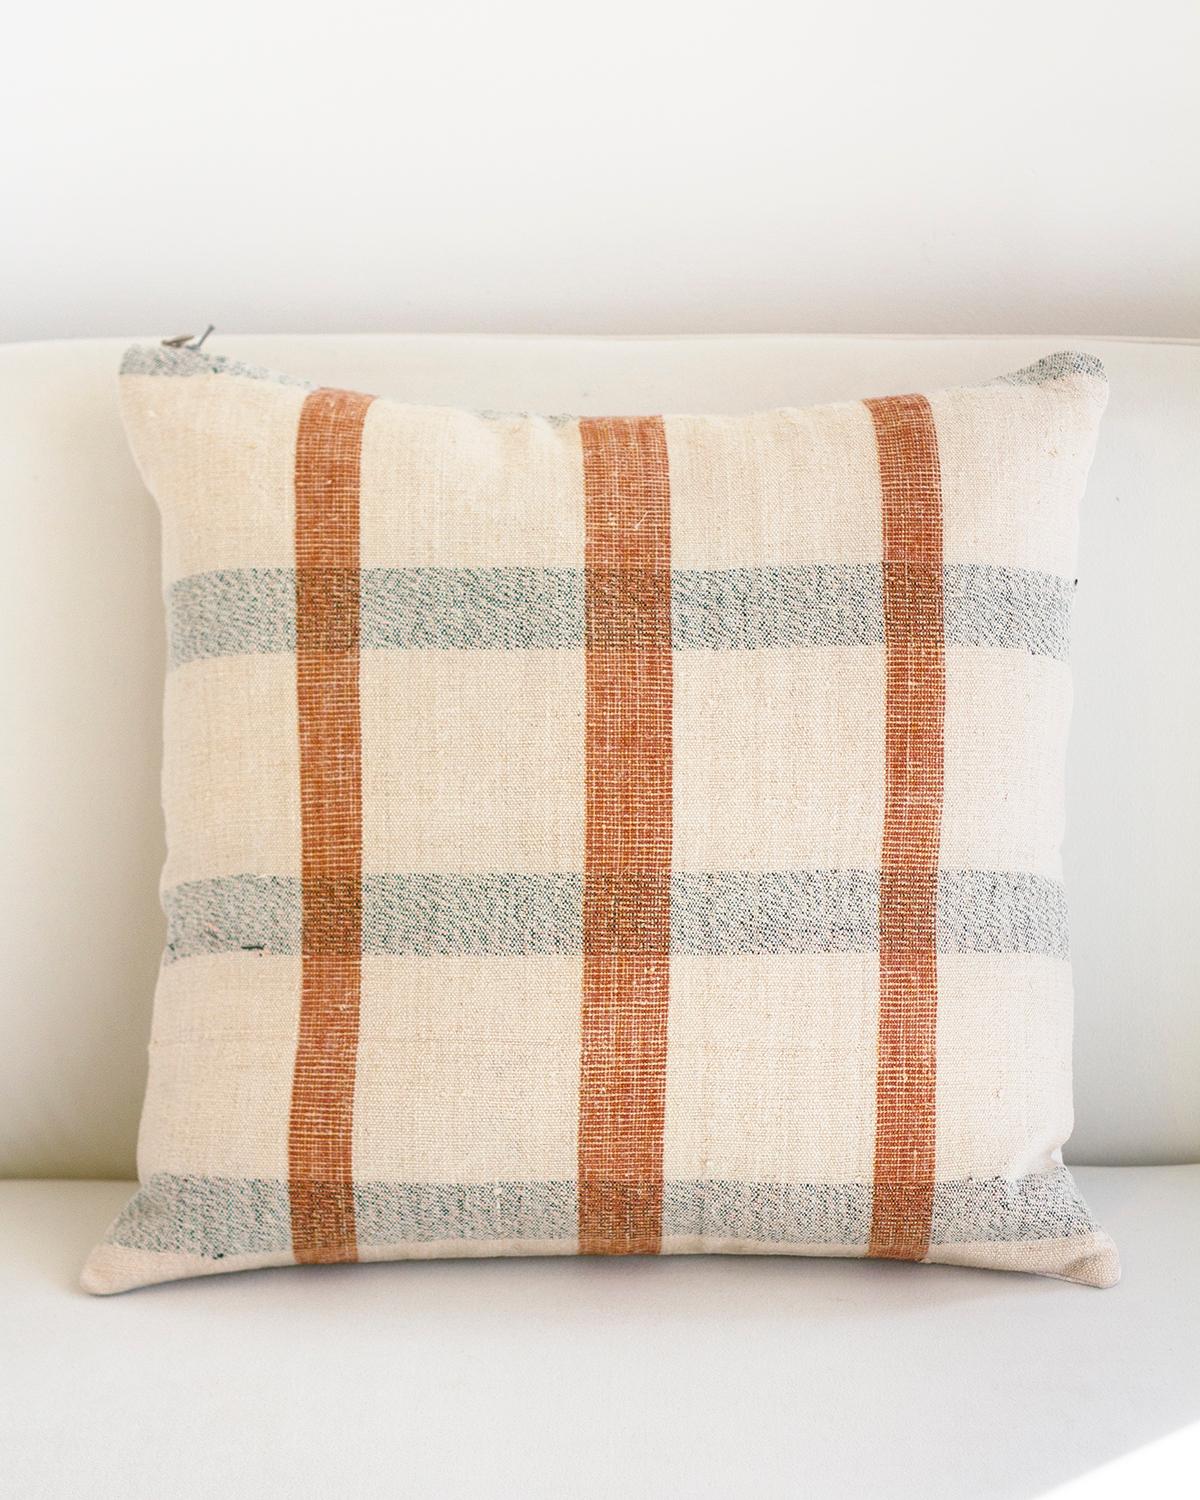 Rustic Matilde Terracotta Checkered Square Throw Pillow made from Vintage Linen